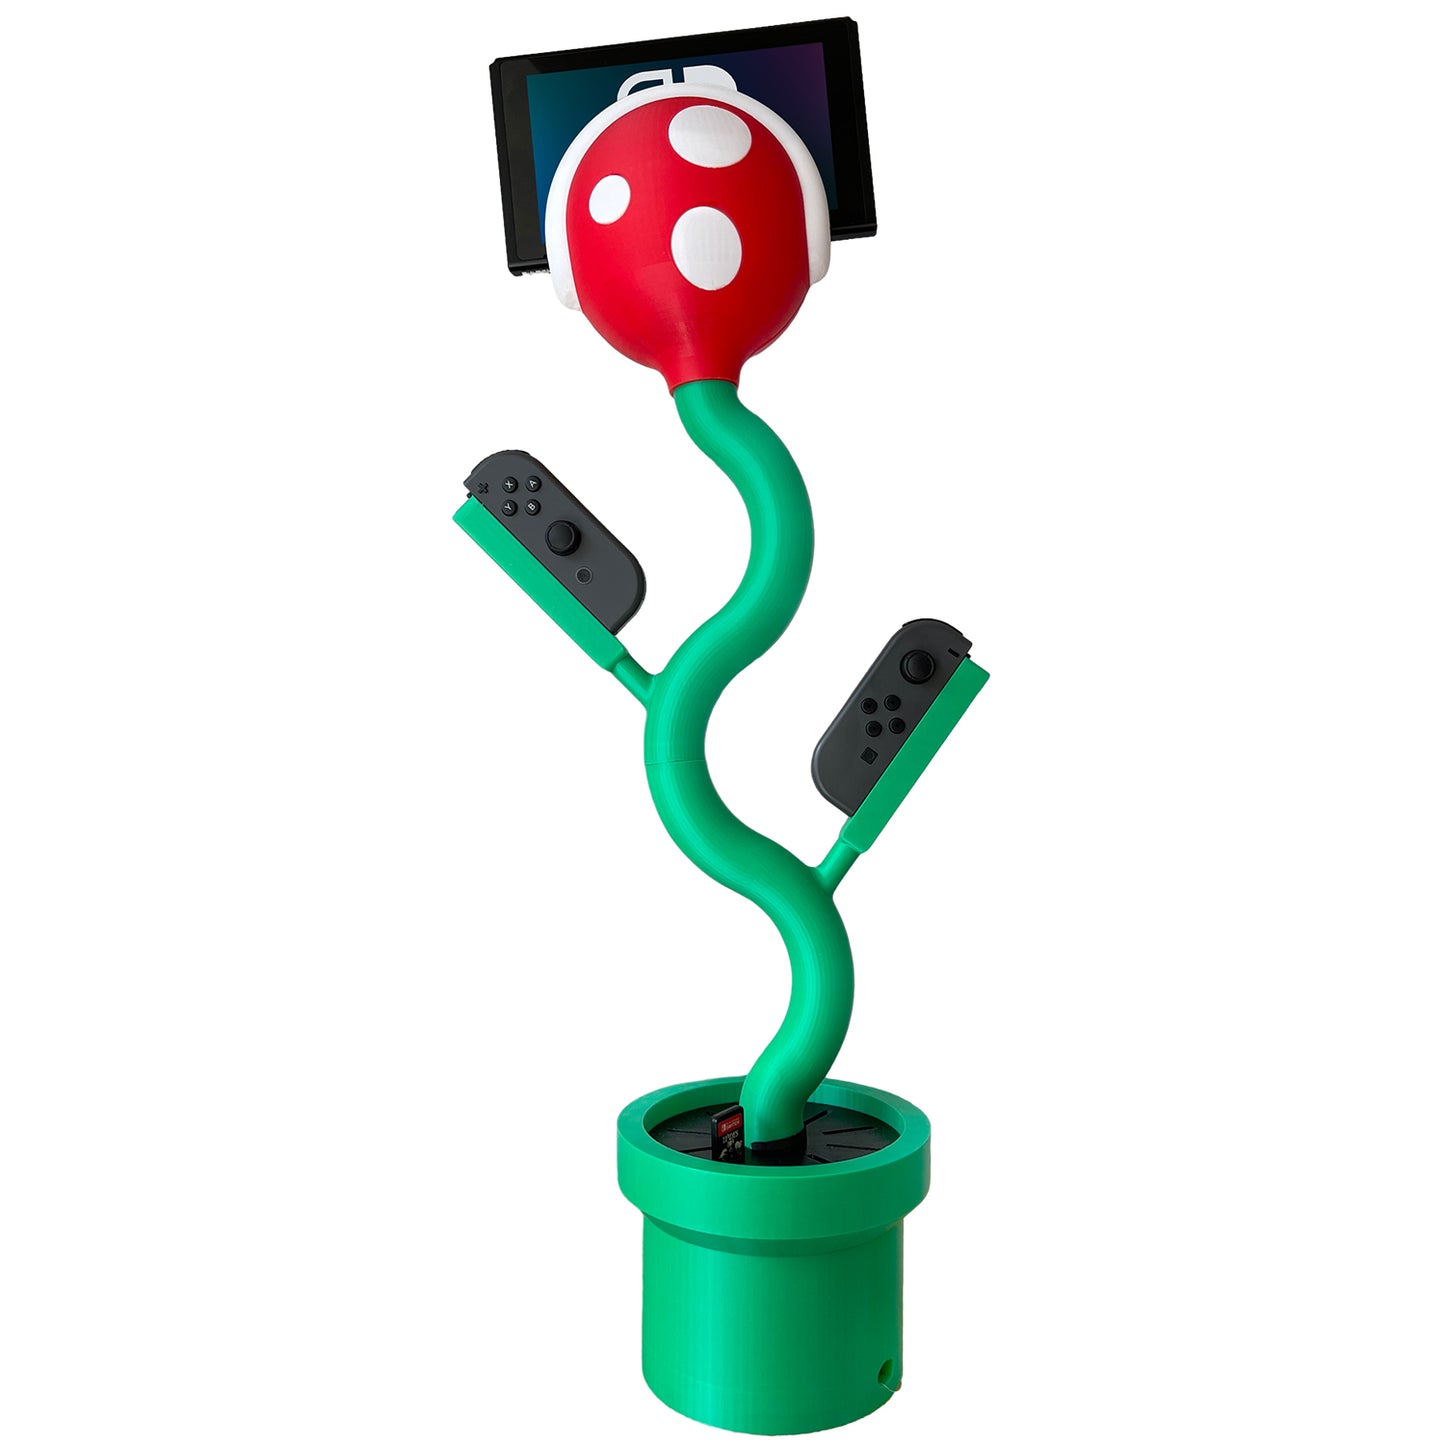 3D Printed Holder of Chomper Plants vs. Zombies, for Nintendo Switch Handheld, Easy Assembly with Super Glue